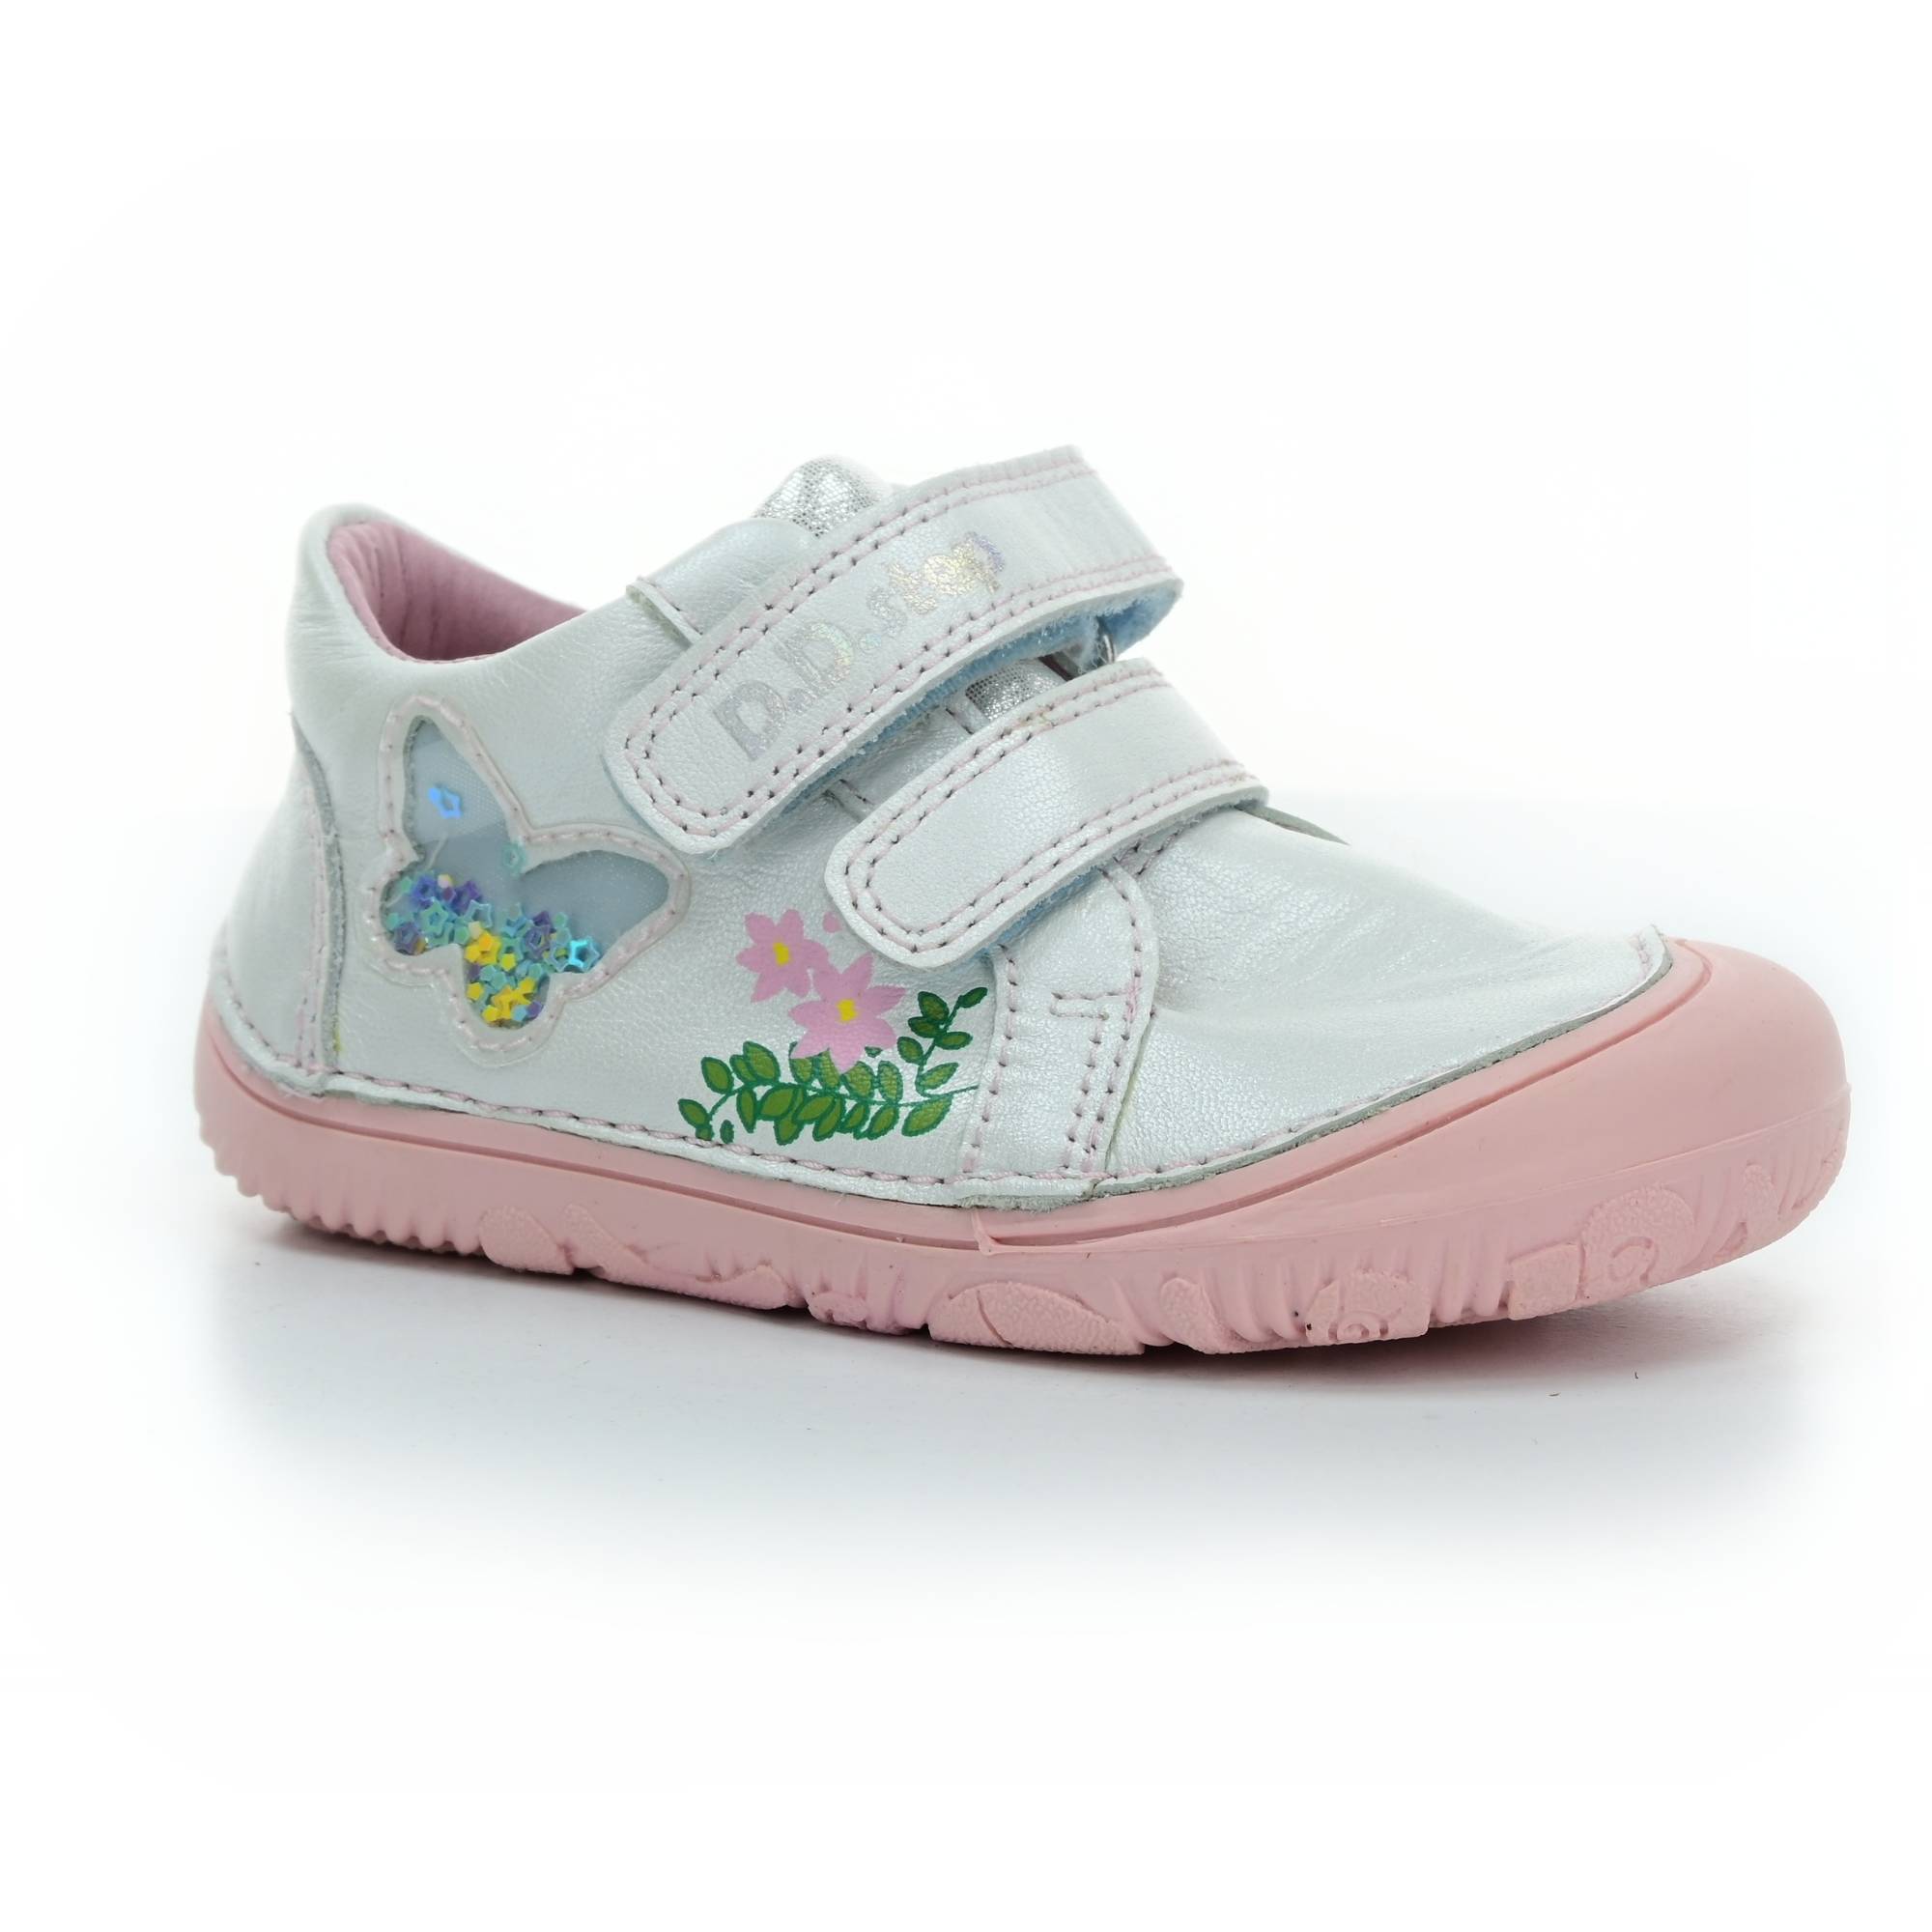 DDStep shoes - 25 White (073) | www.footic.com